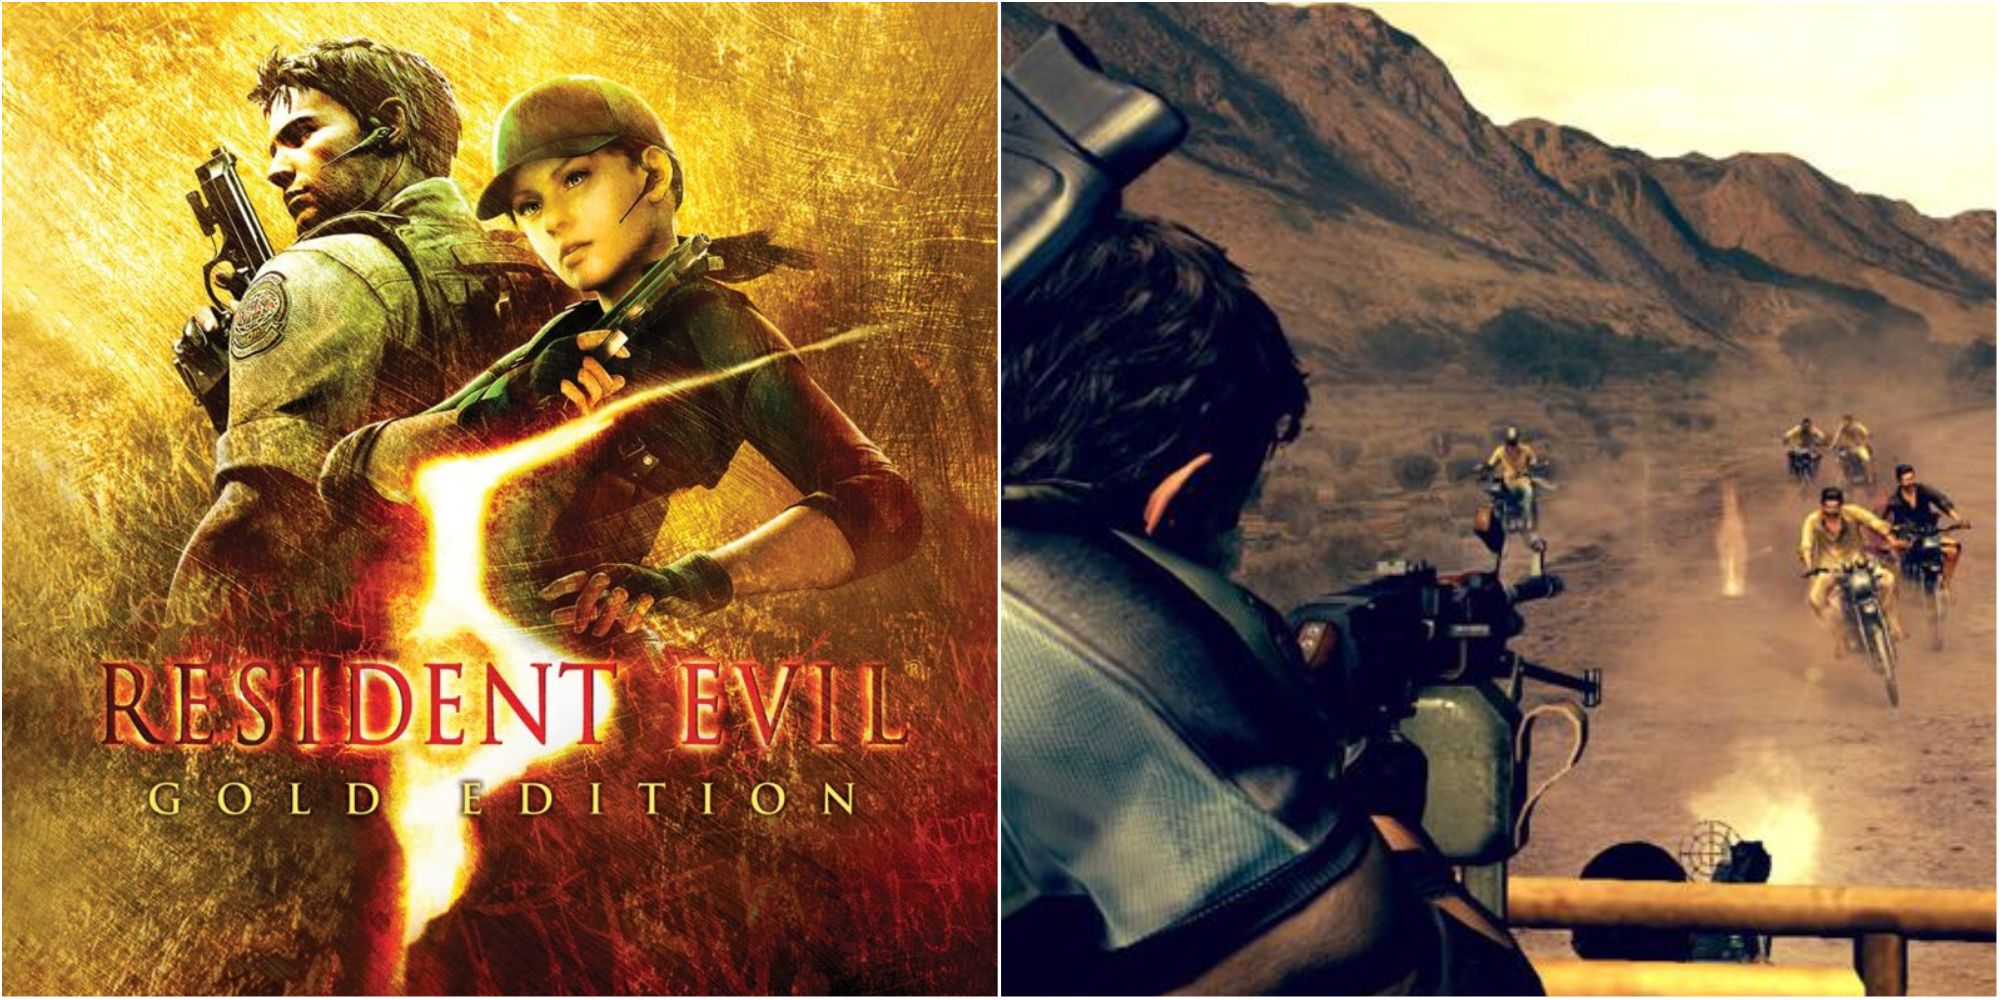 resident evil 5 gold edition cover & gameplay